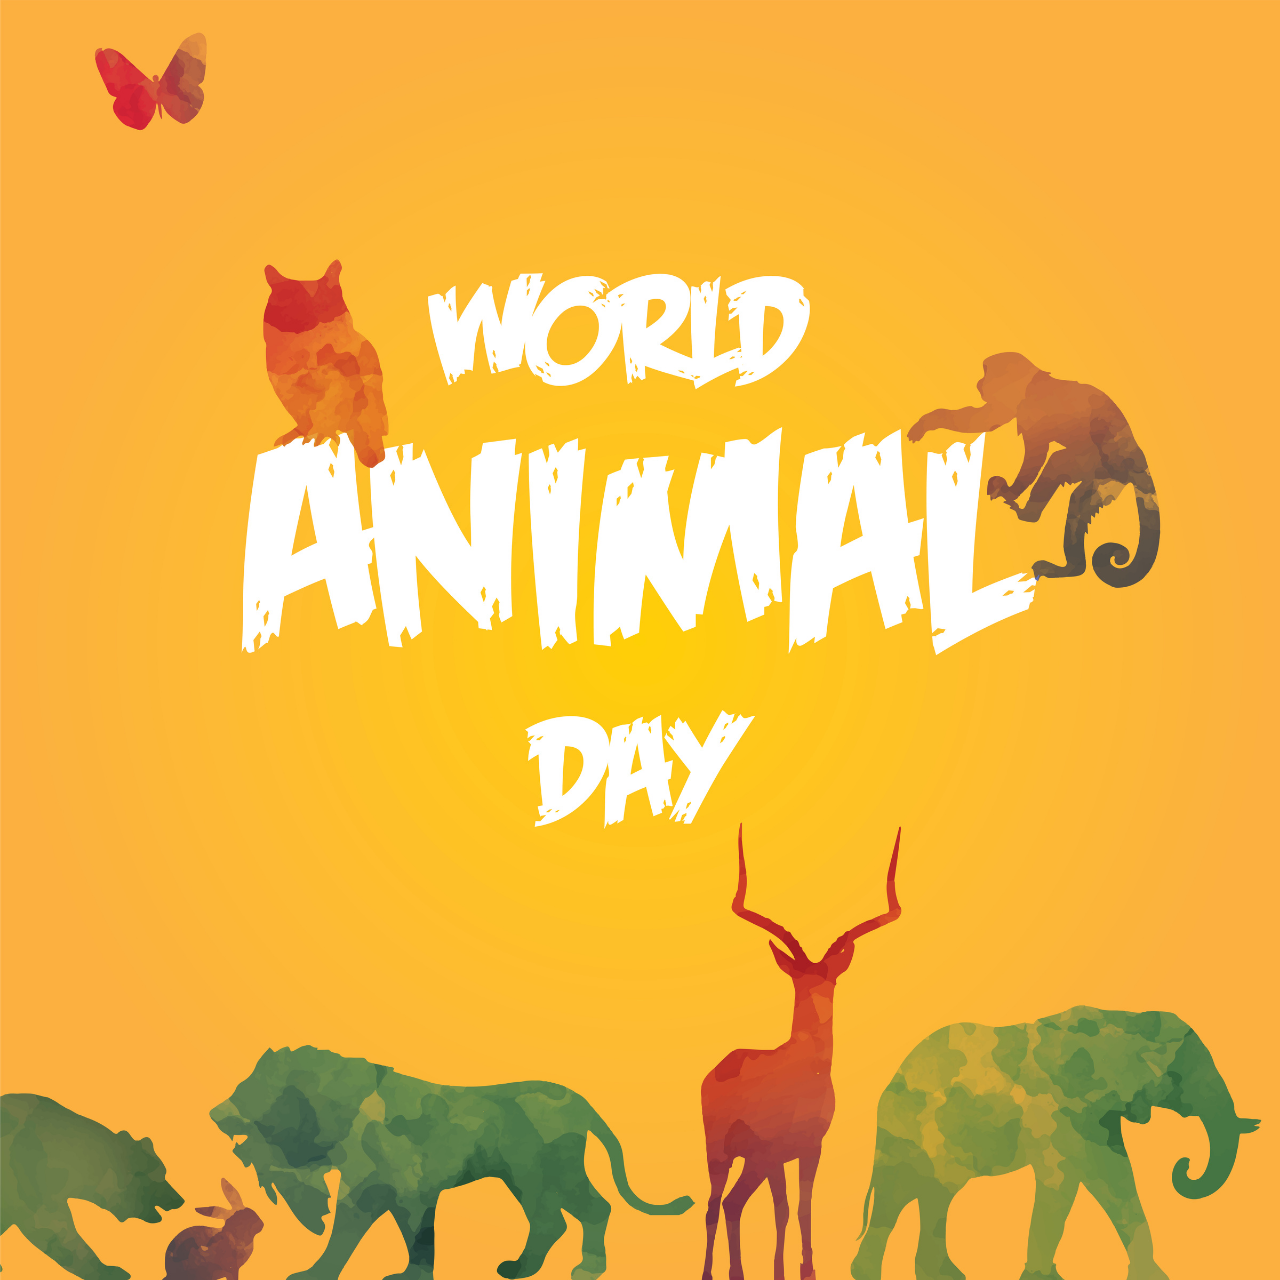 World Animal Day 2021: When is World Animal Day in India? Current Theme, History, Significance, Celebration, Activities and More